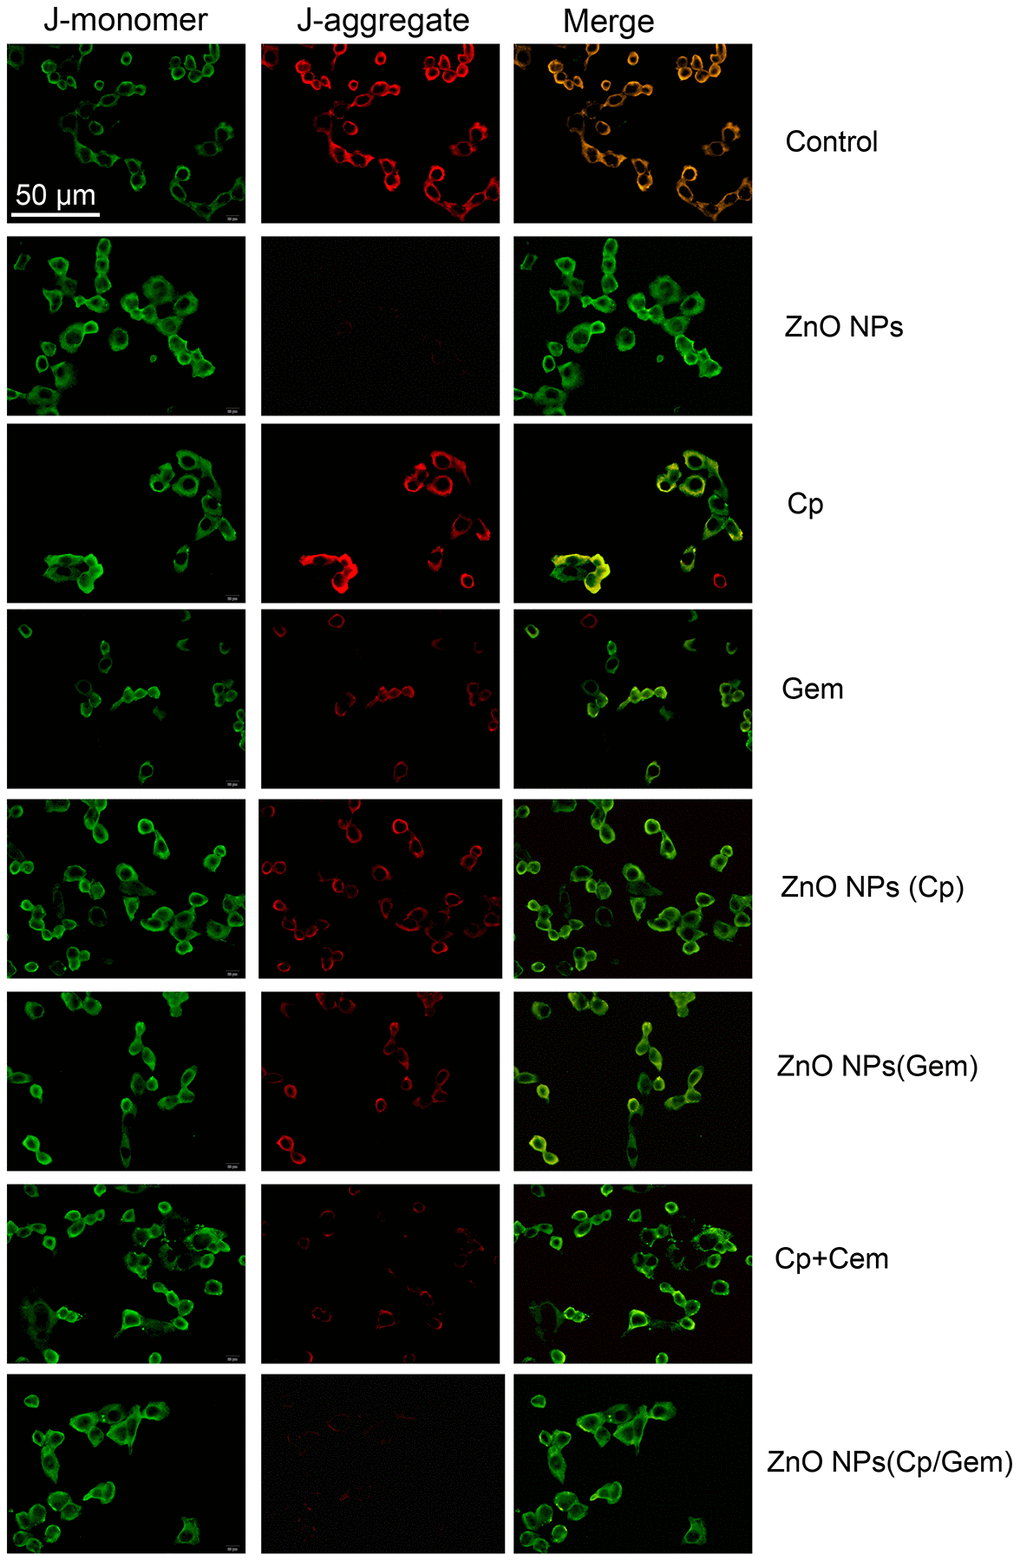 The mitochondrial membrane potential in A549 cells in ZnO-NPs, Cp, Gem, Cp+Gem, ZnO-NPs(Cp), ZnO-NPs(Gem) and ZnO NPs(Cp/Gem) groups is observed under a fluorescence microscope.